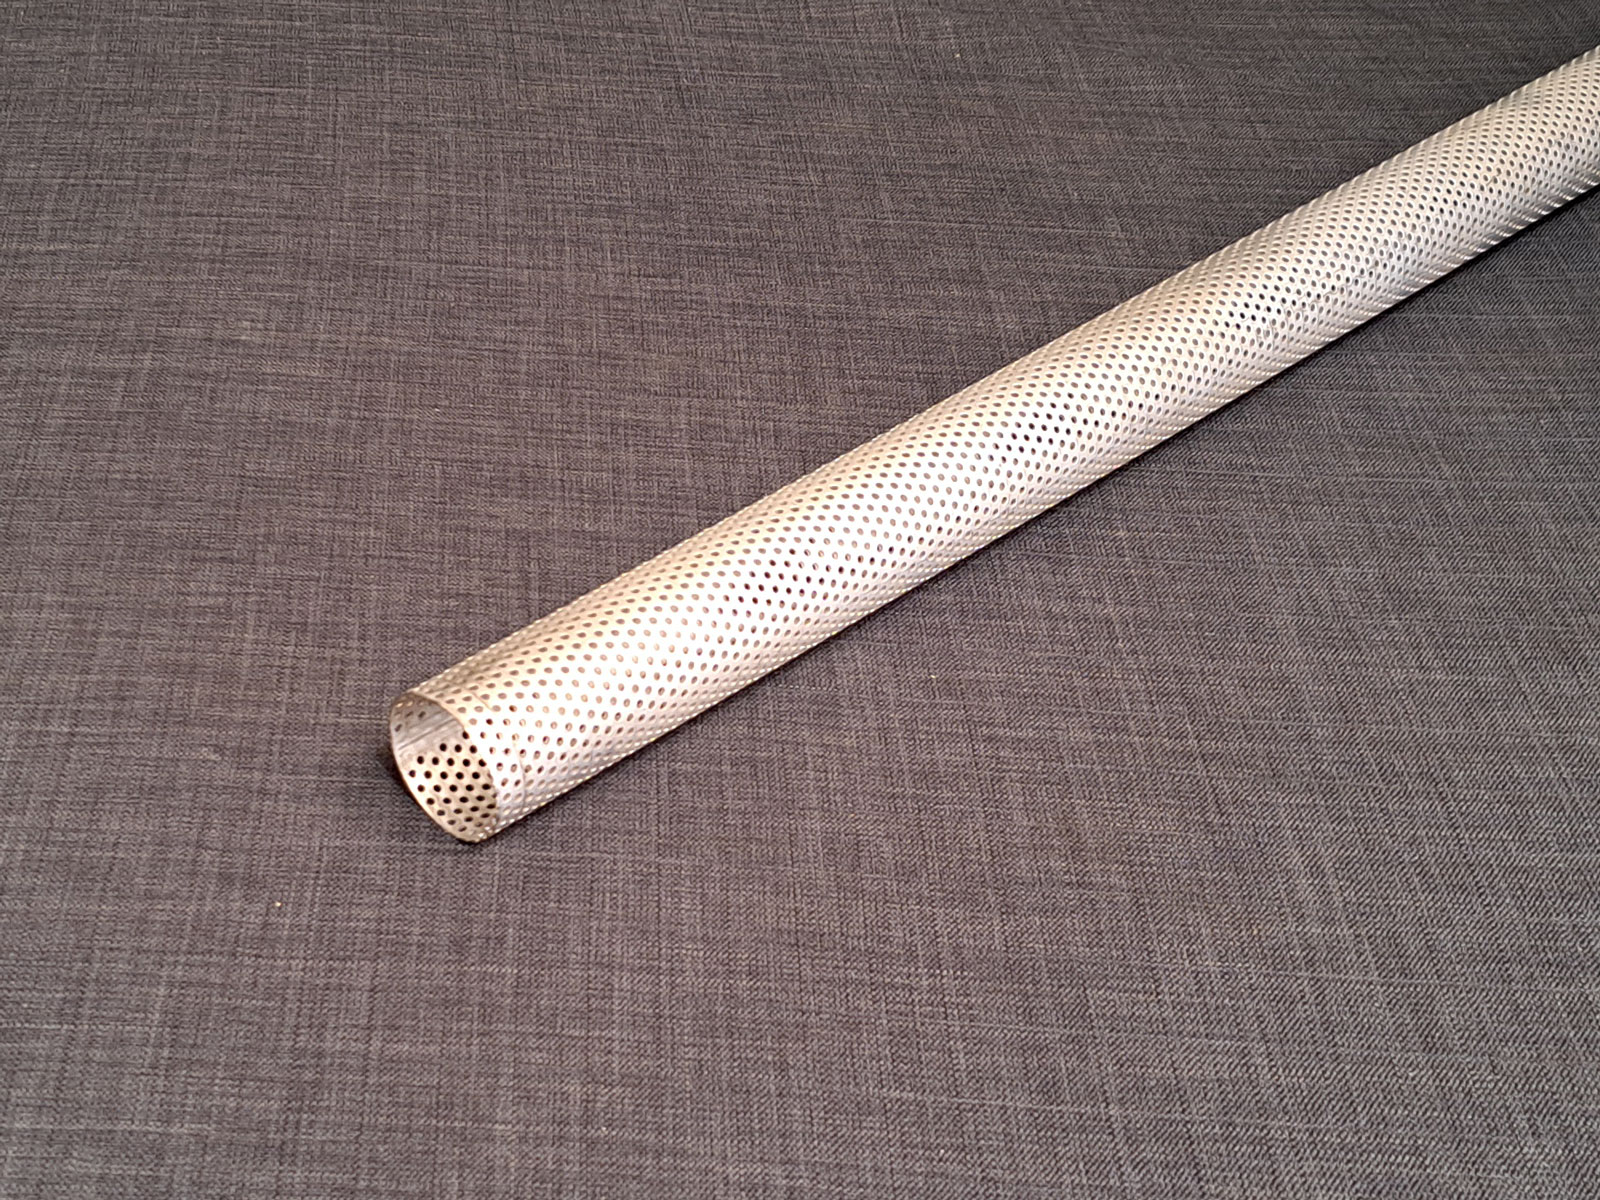 44.45mm x 1.2mm Perforated Stainless Steel Tubing